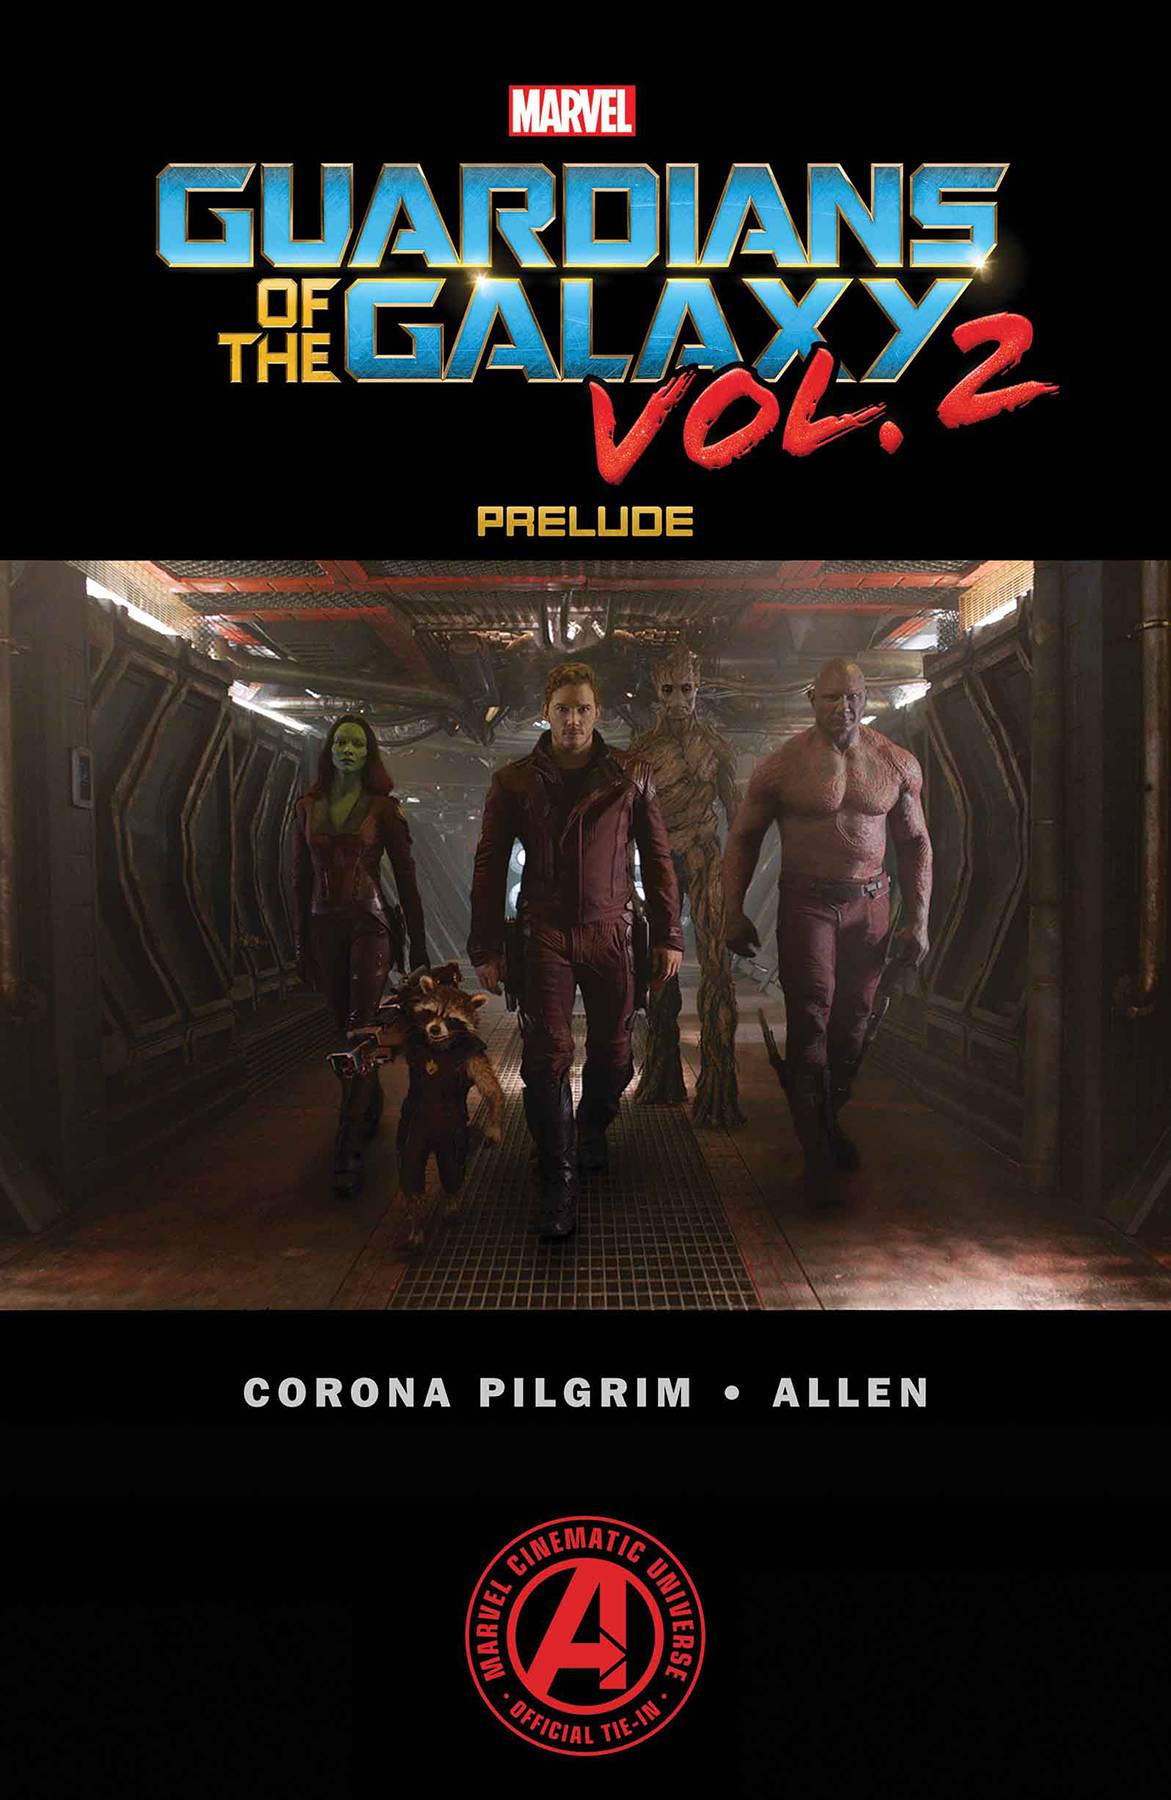 Marvel Guardians of Galaxy Volume 2 Prelude #2